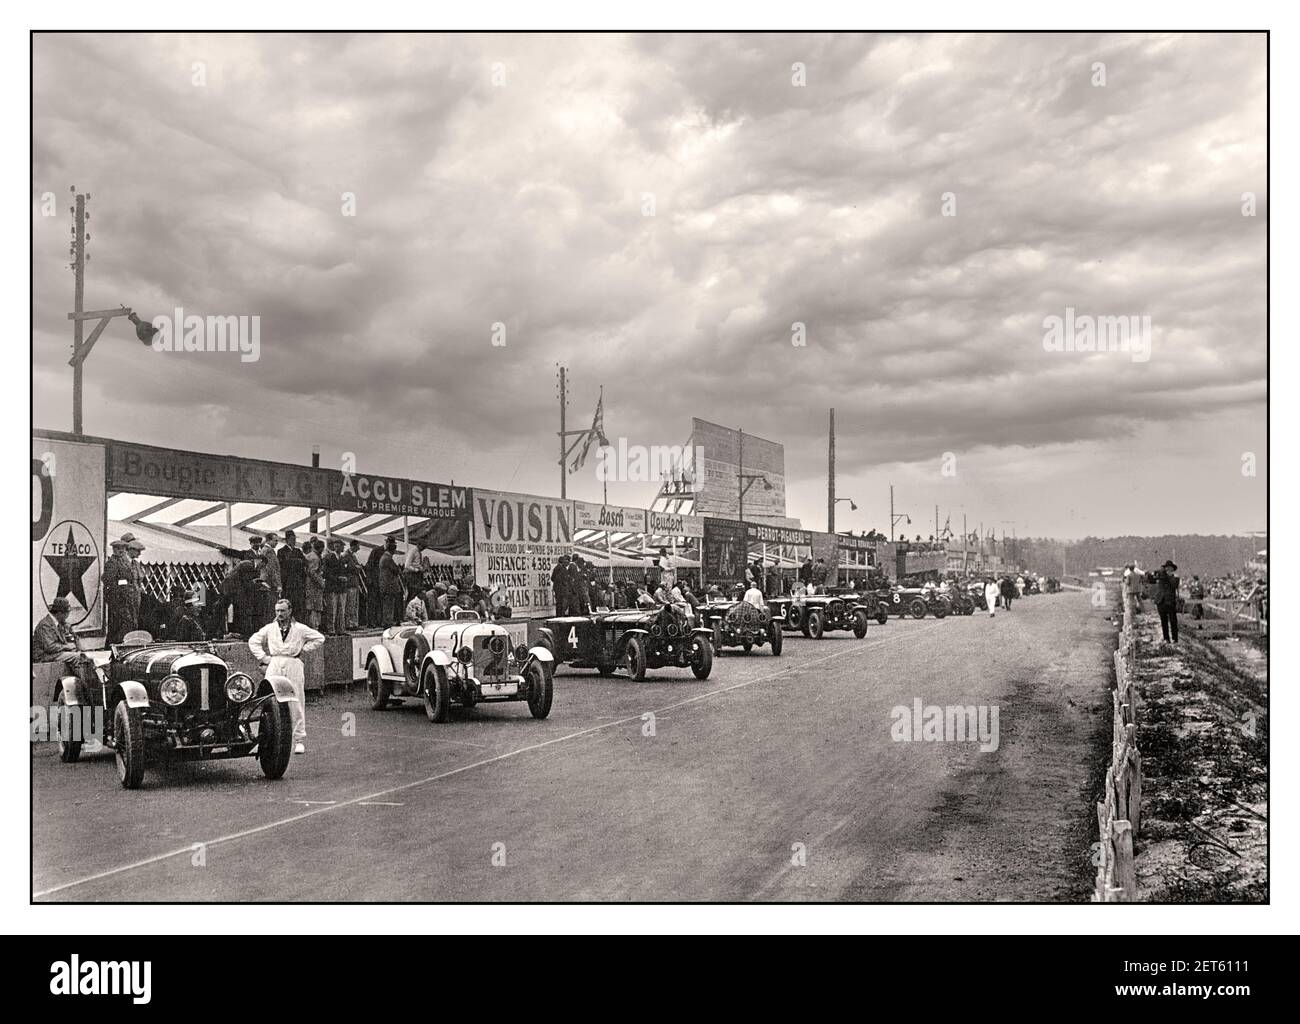 Vintage LE MANS 24 Hr Grid ready for running start at the 1929 24 Hours of Le Mans Motor Race France Winning Bentley Speed Six No 1 on left in foreground. Stock Photo